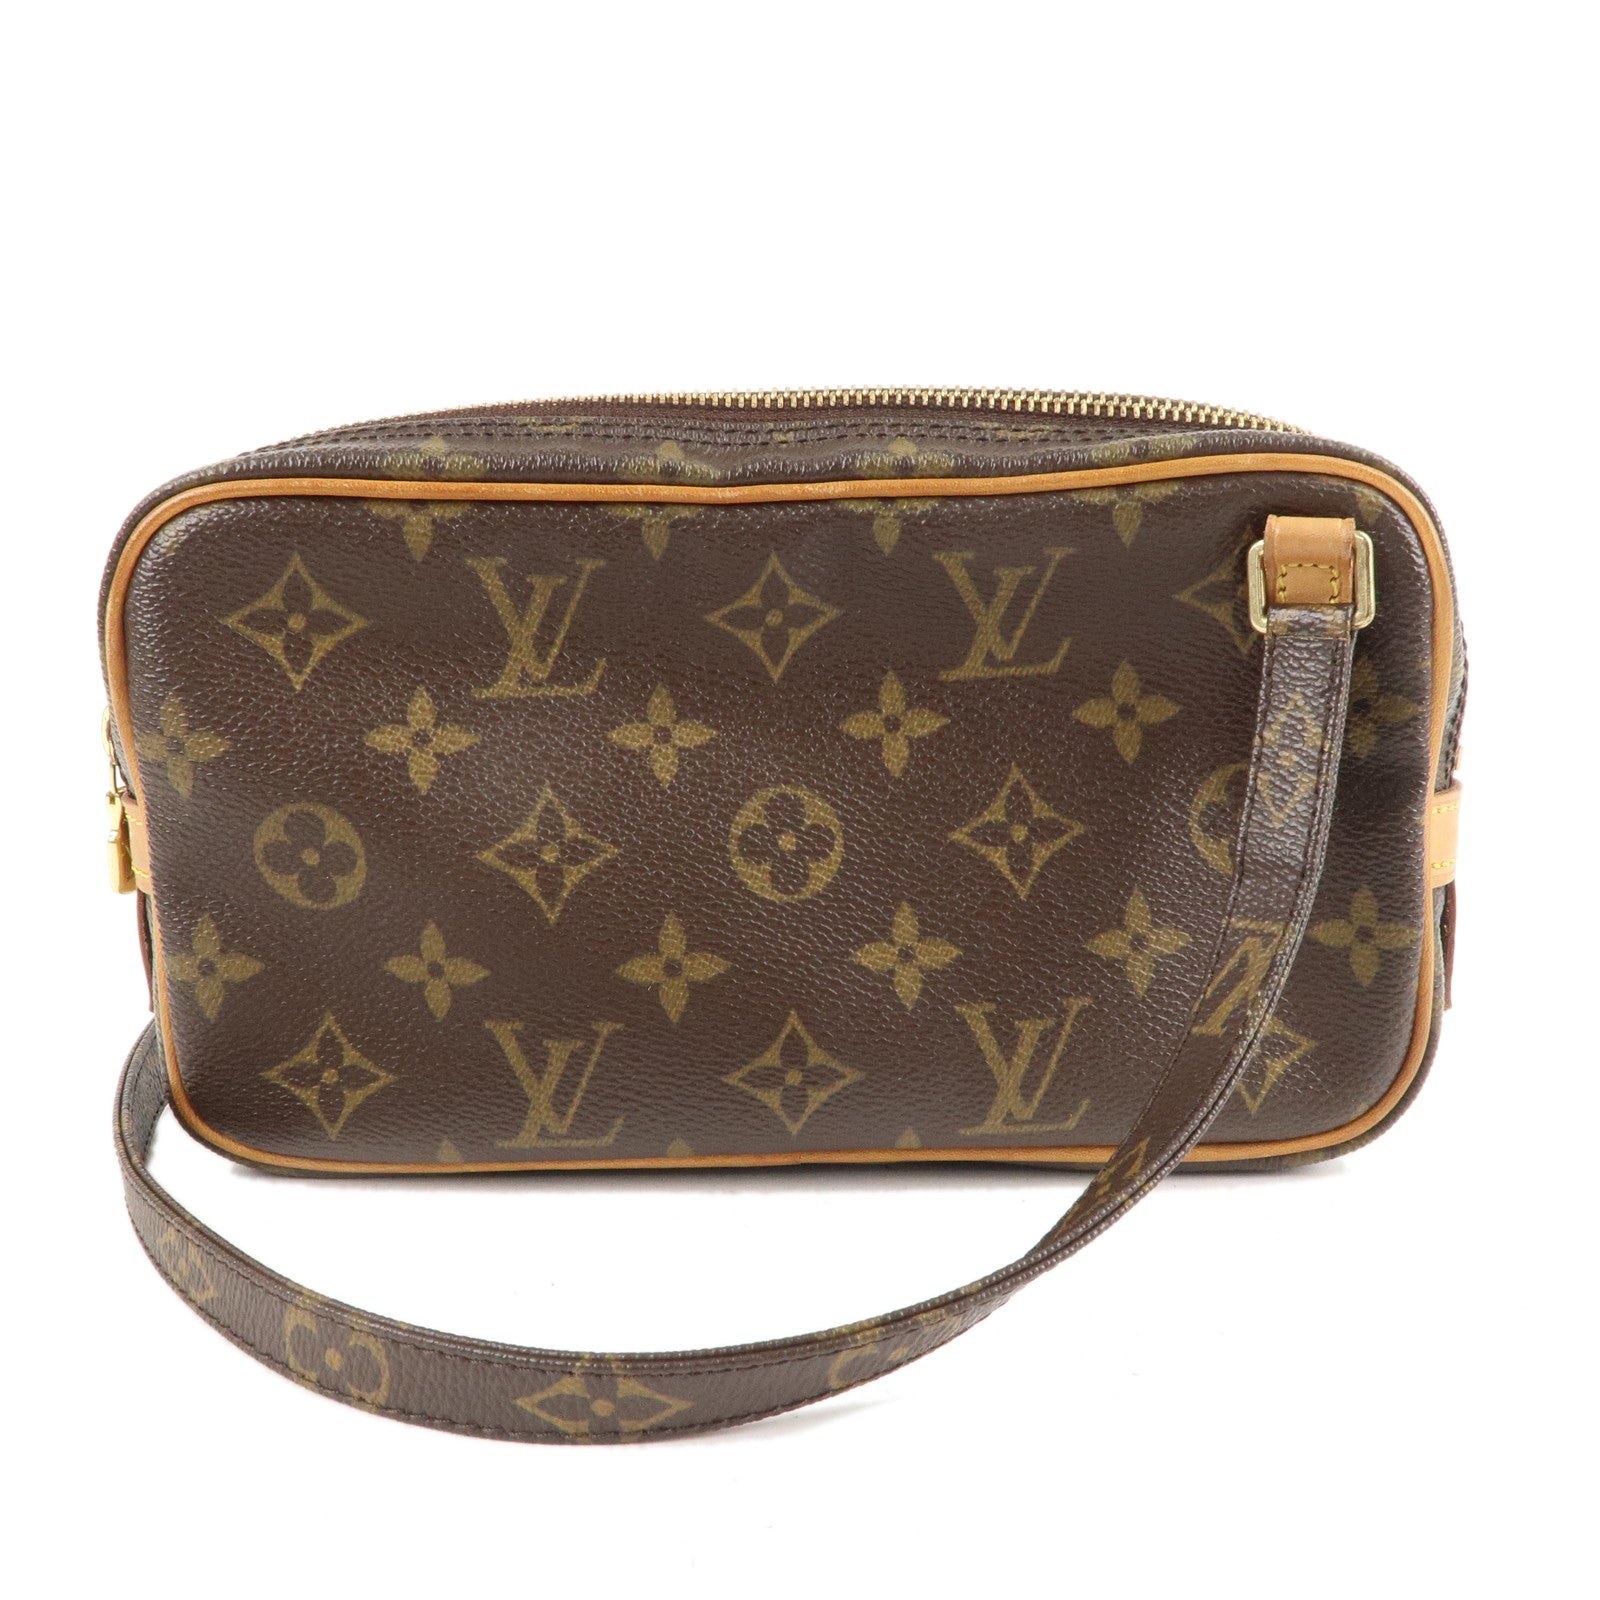 Preloved authentic Louis vuitton Lv vintage marly bandouliere